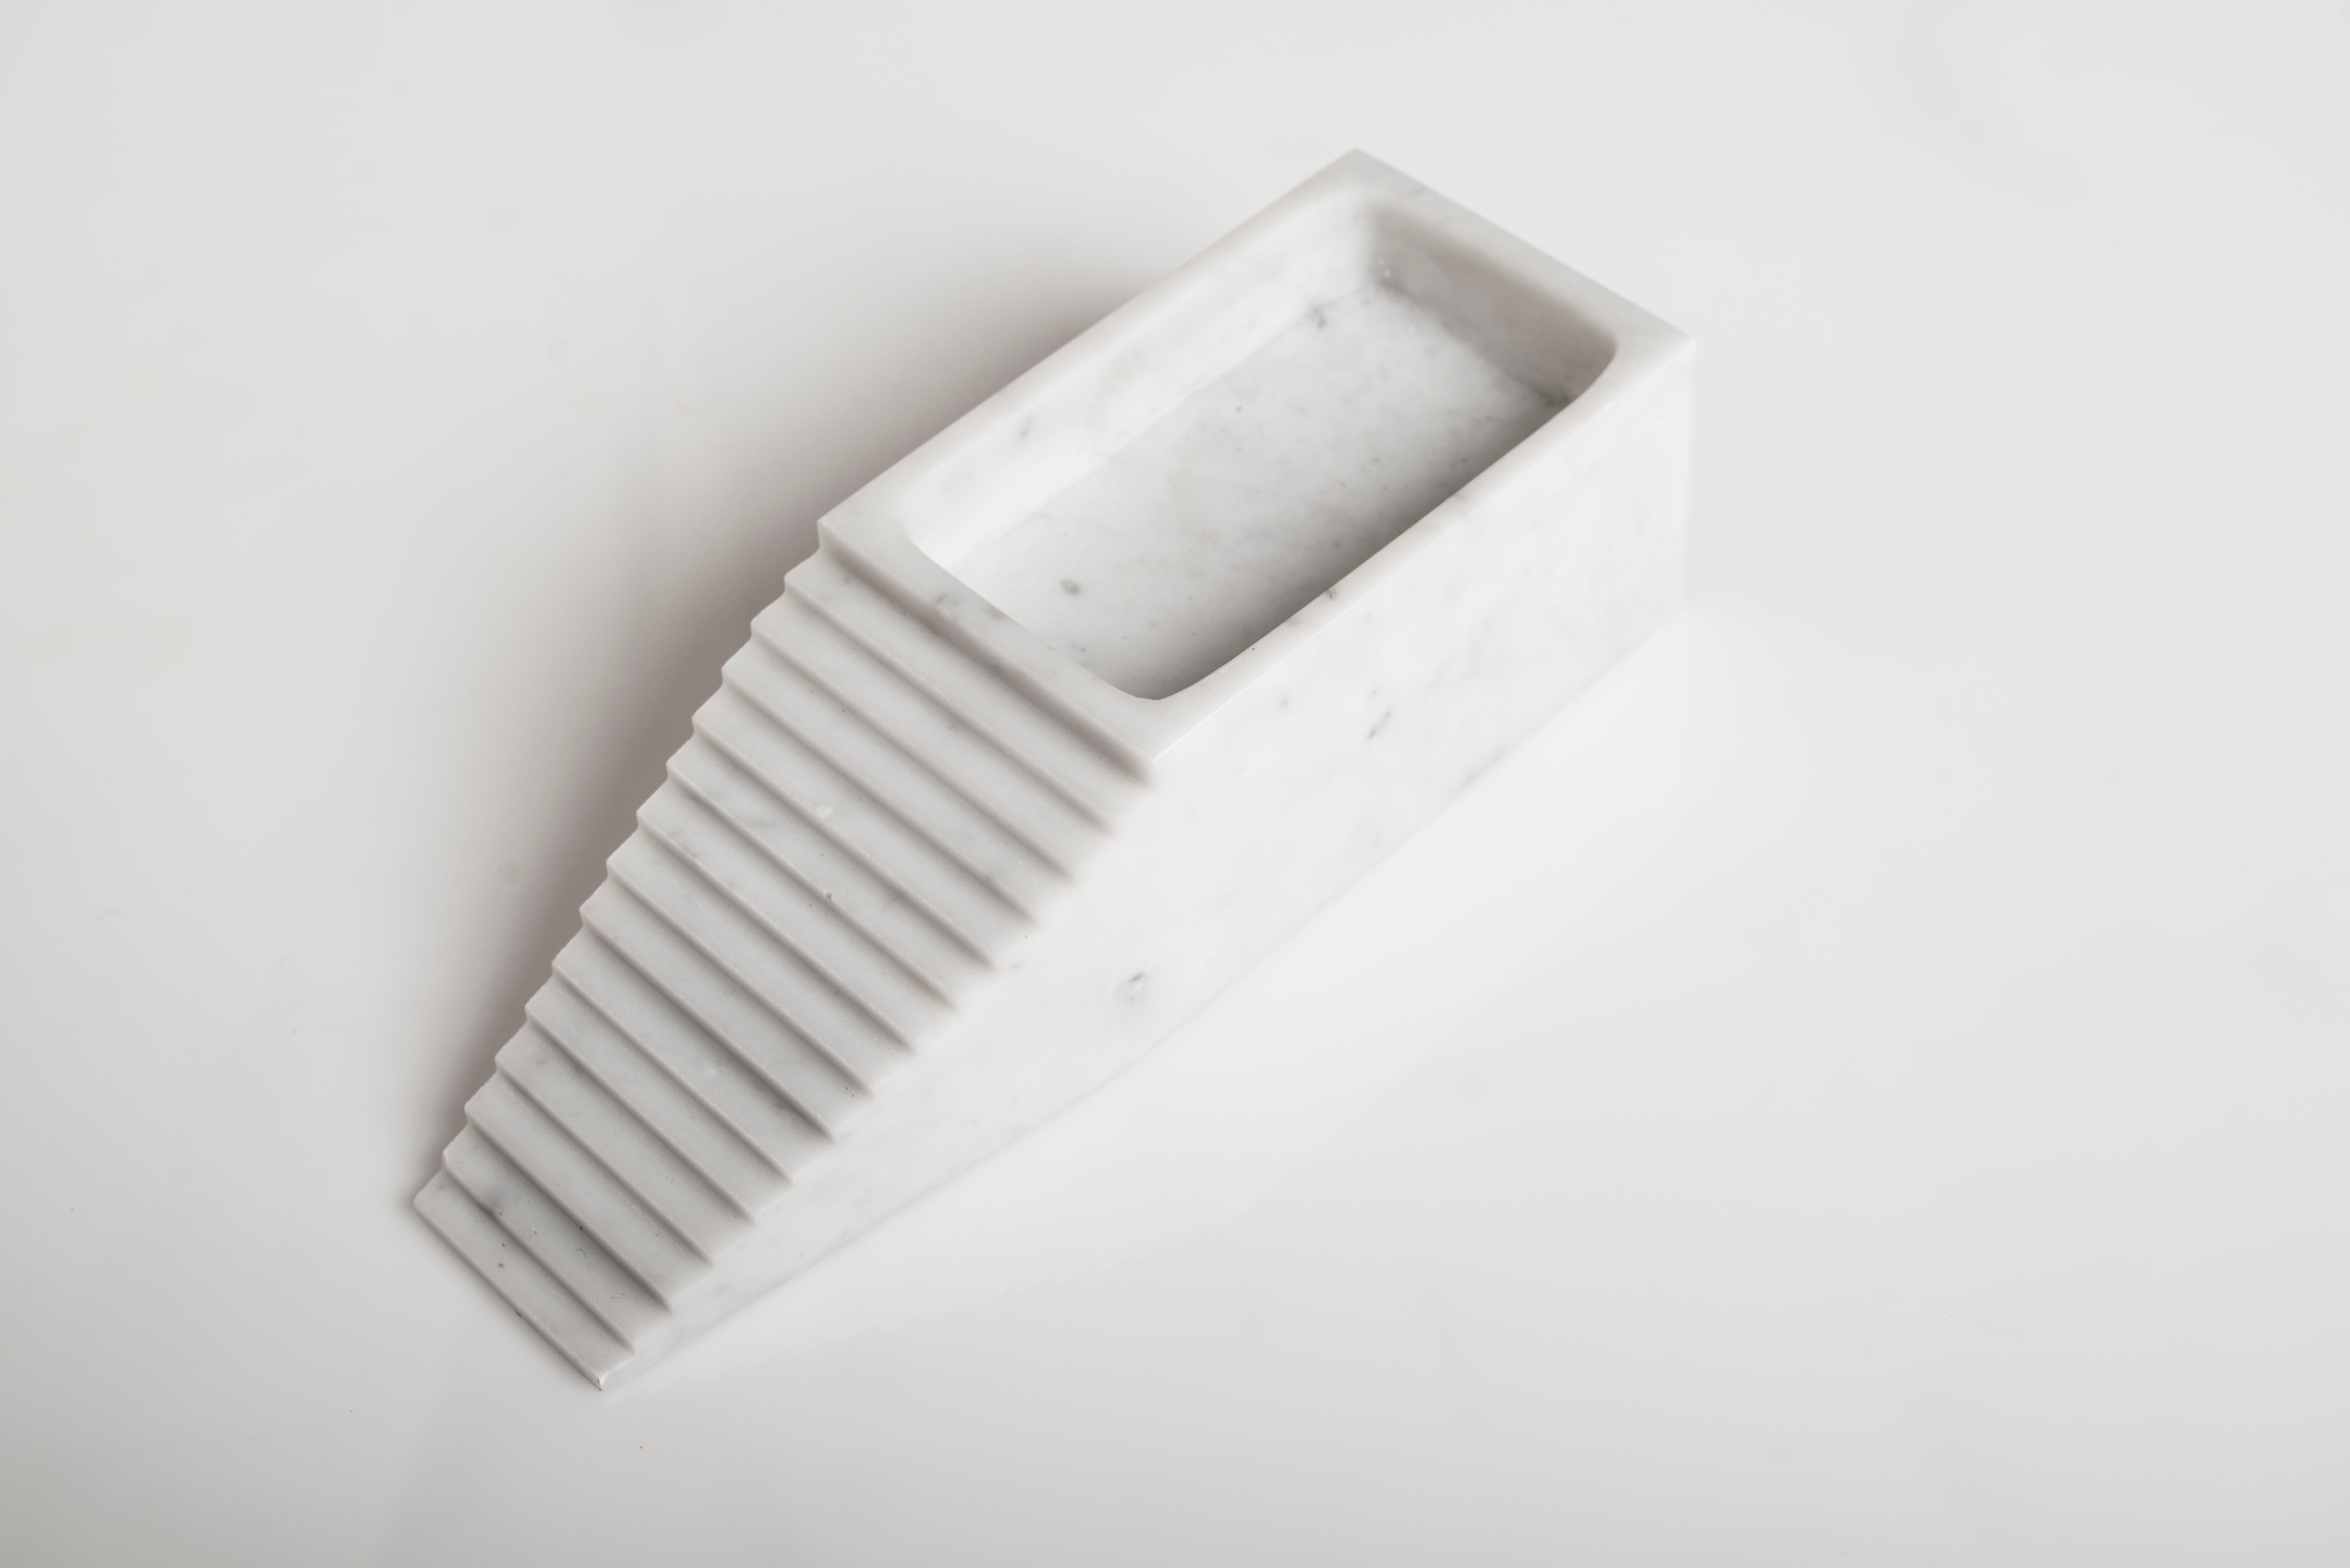 Capri sculpture by Carlo Massoud.
Handmade. 
Dimensions: D 30 x W 10 x H 7 cm. 
Materials: carrara marble.

Carlo Massoud’s work stems from his relentless questioning of social, political, cultural, and environmental norms. He often pushes his